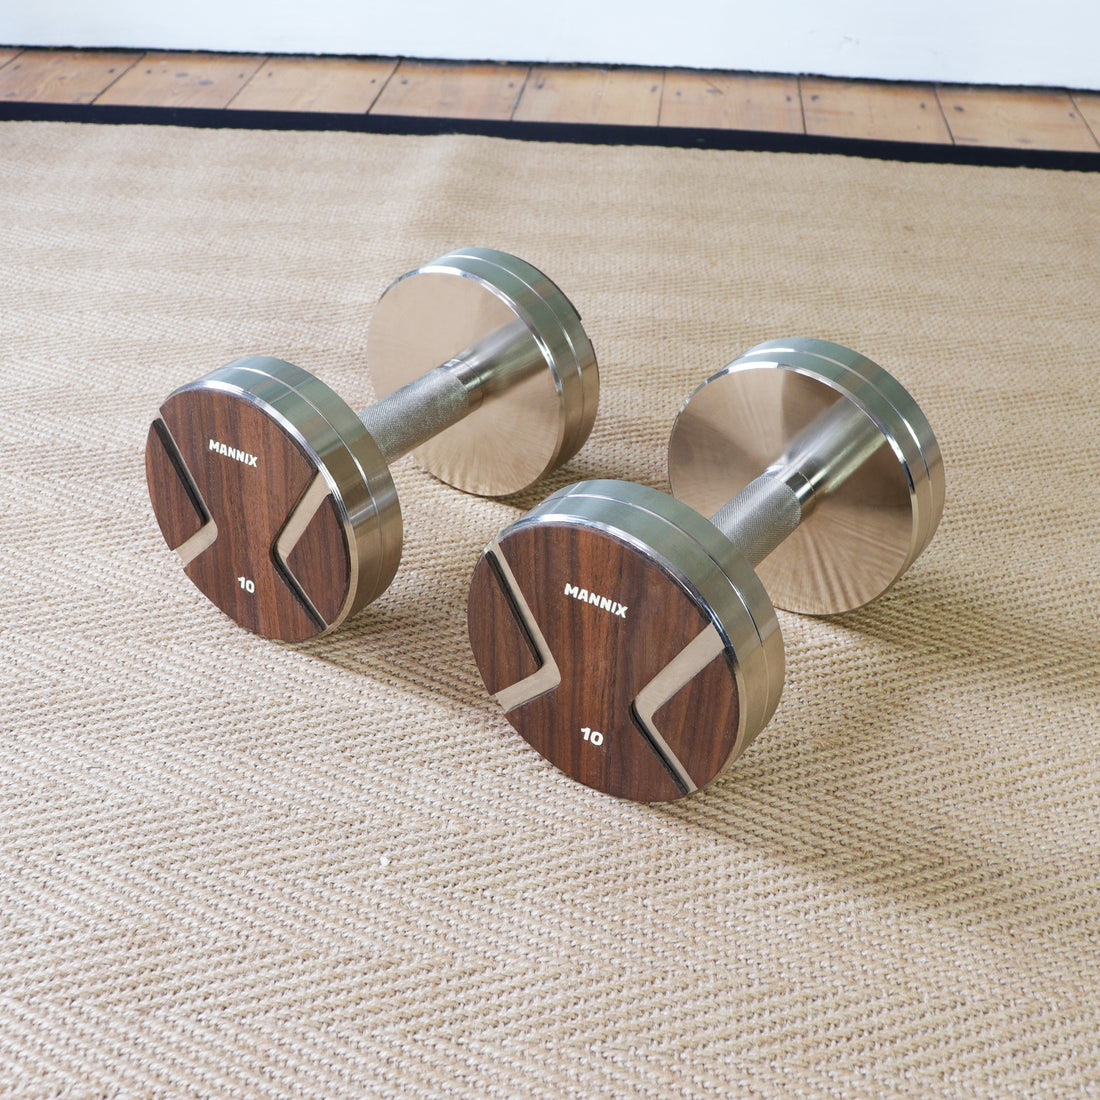 Mannix Sports 10kg Walnut-Faced Nickel Plated Dumbbell Pair